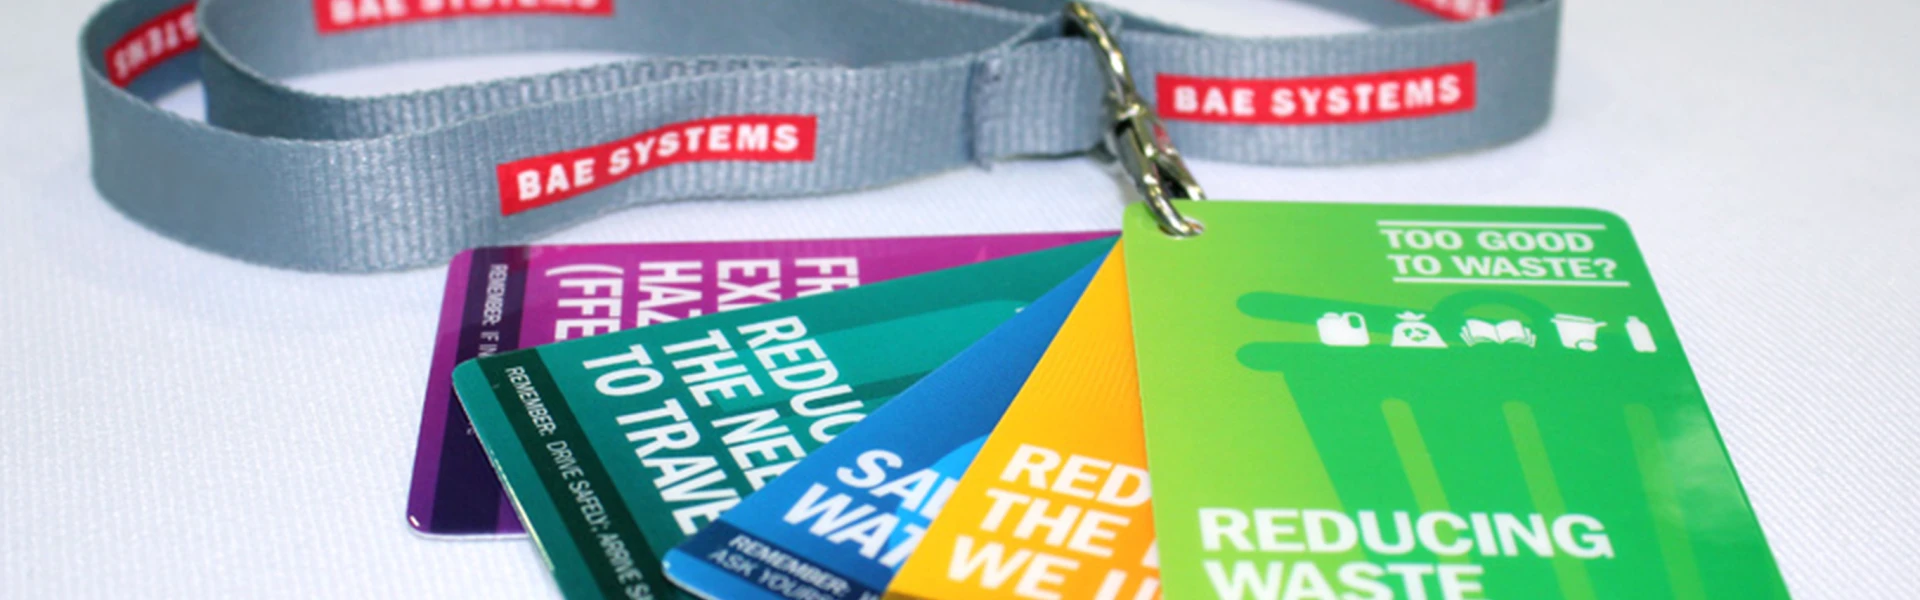 BAE Systems 'Too good to waste' Campaign